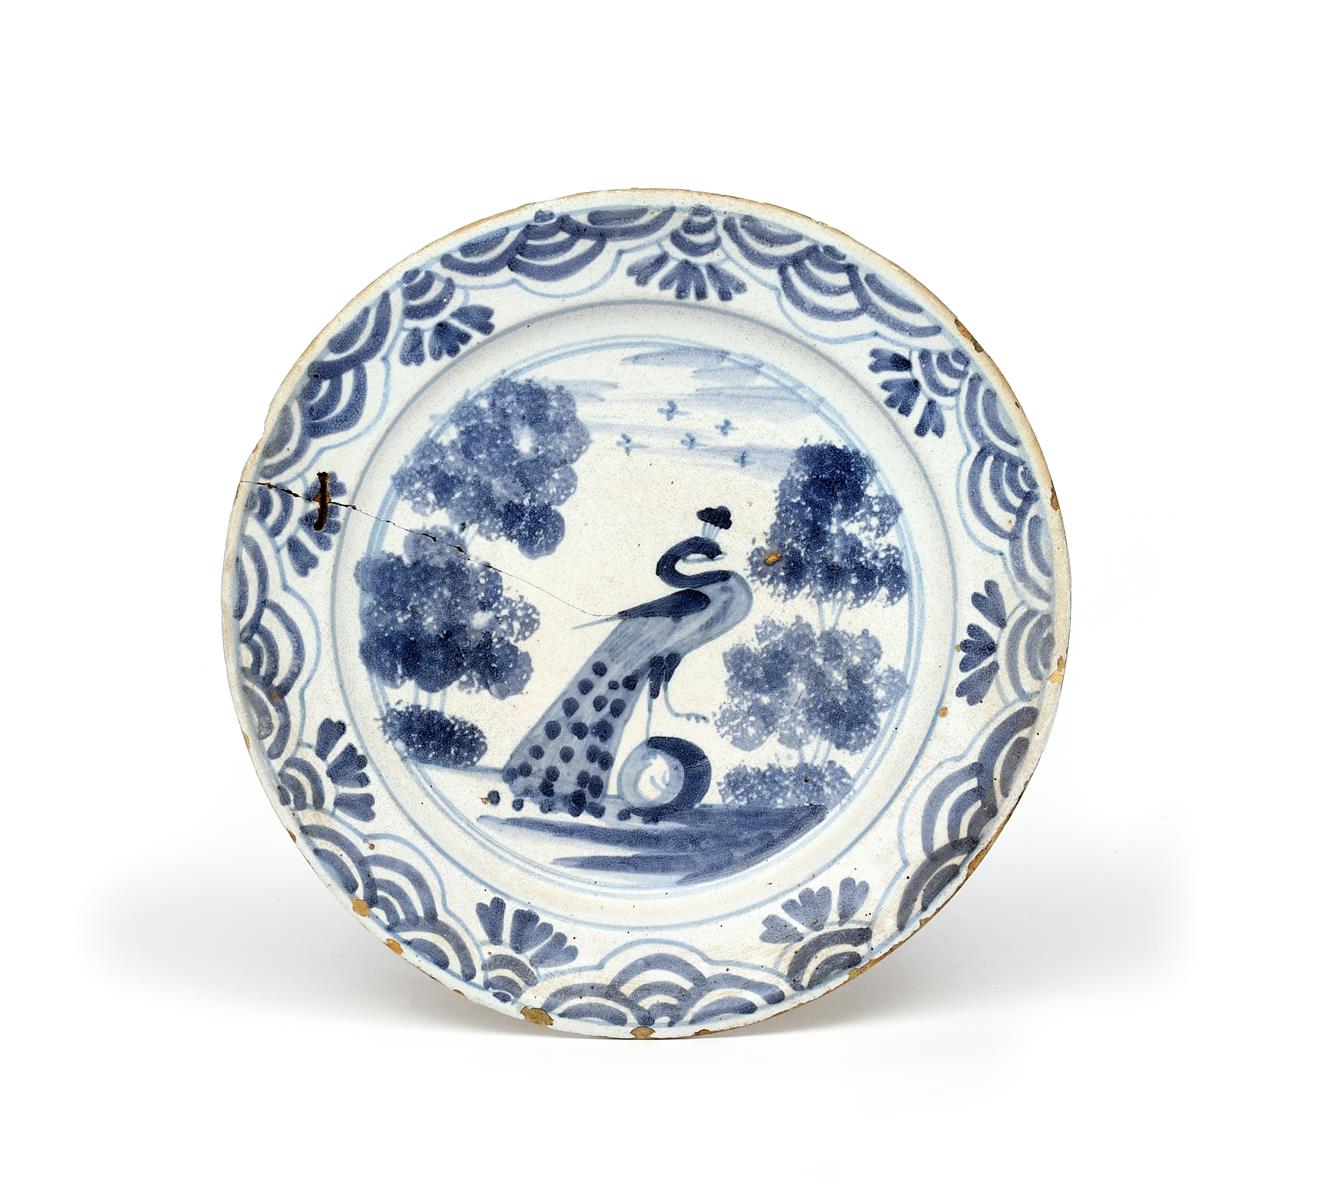 A Delft charger c.1680-90, painted in blue with a strutting peacock flanked by tall sponged trees,